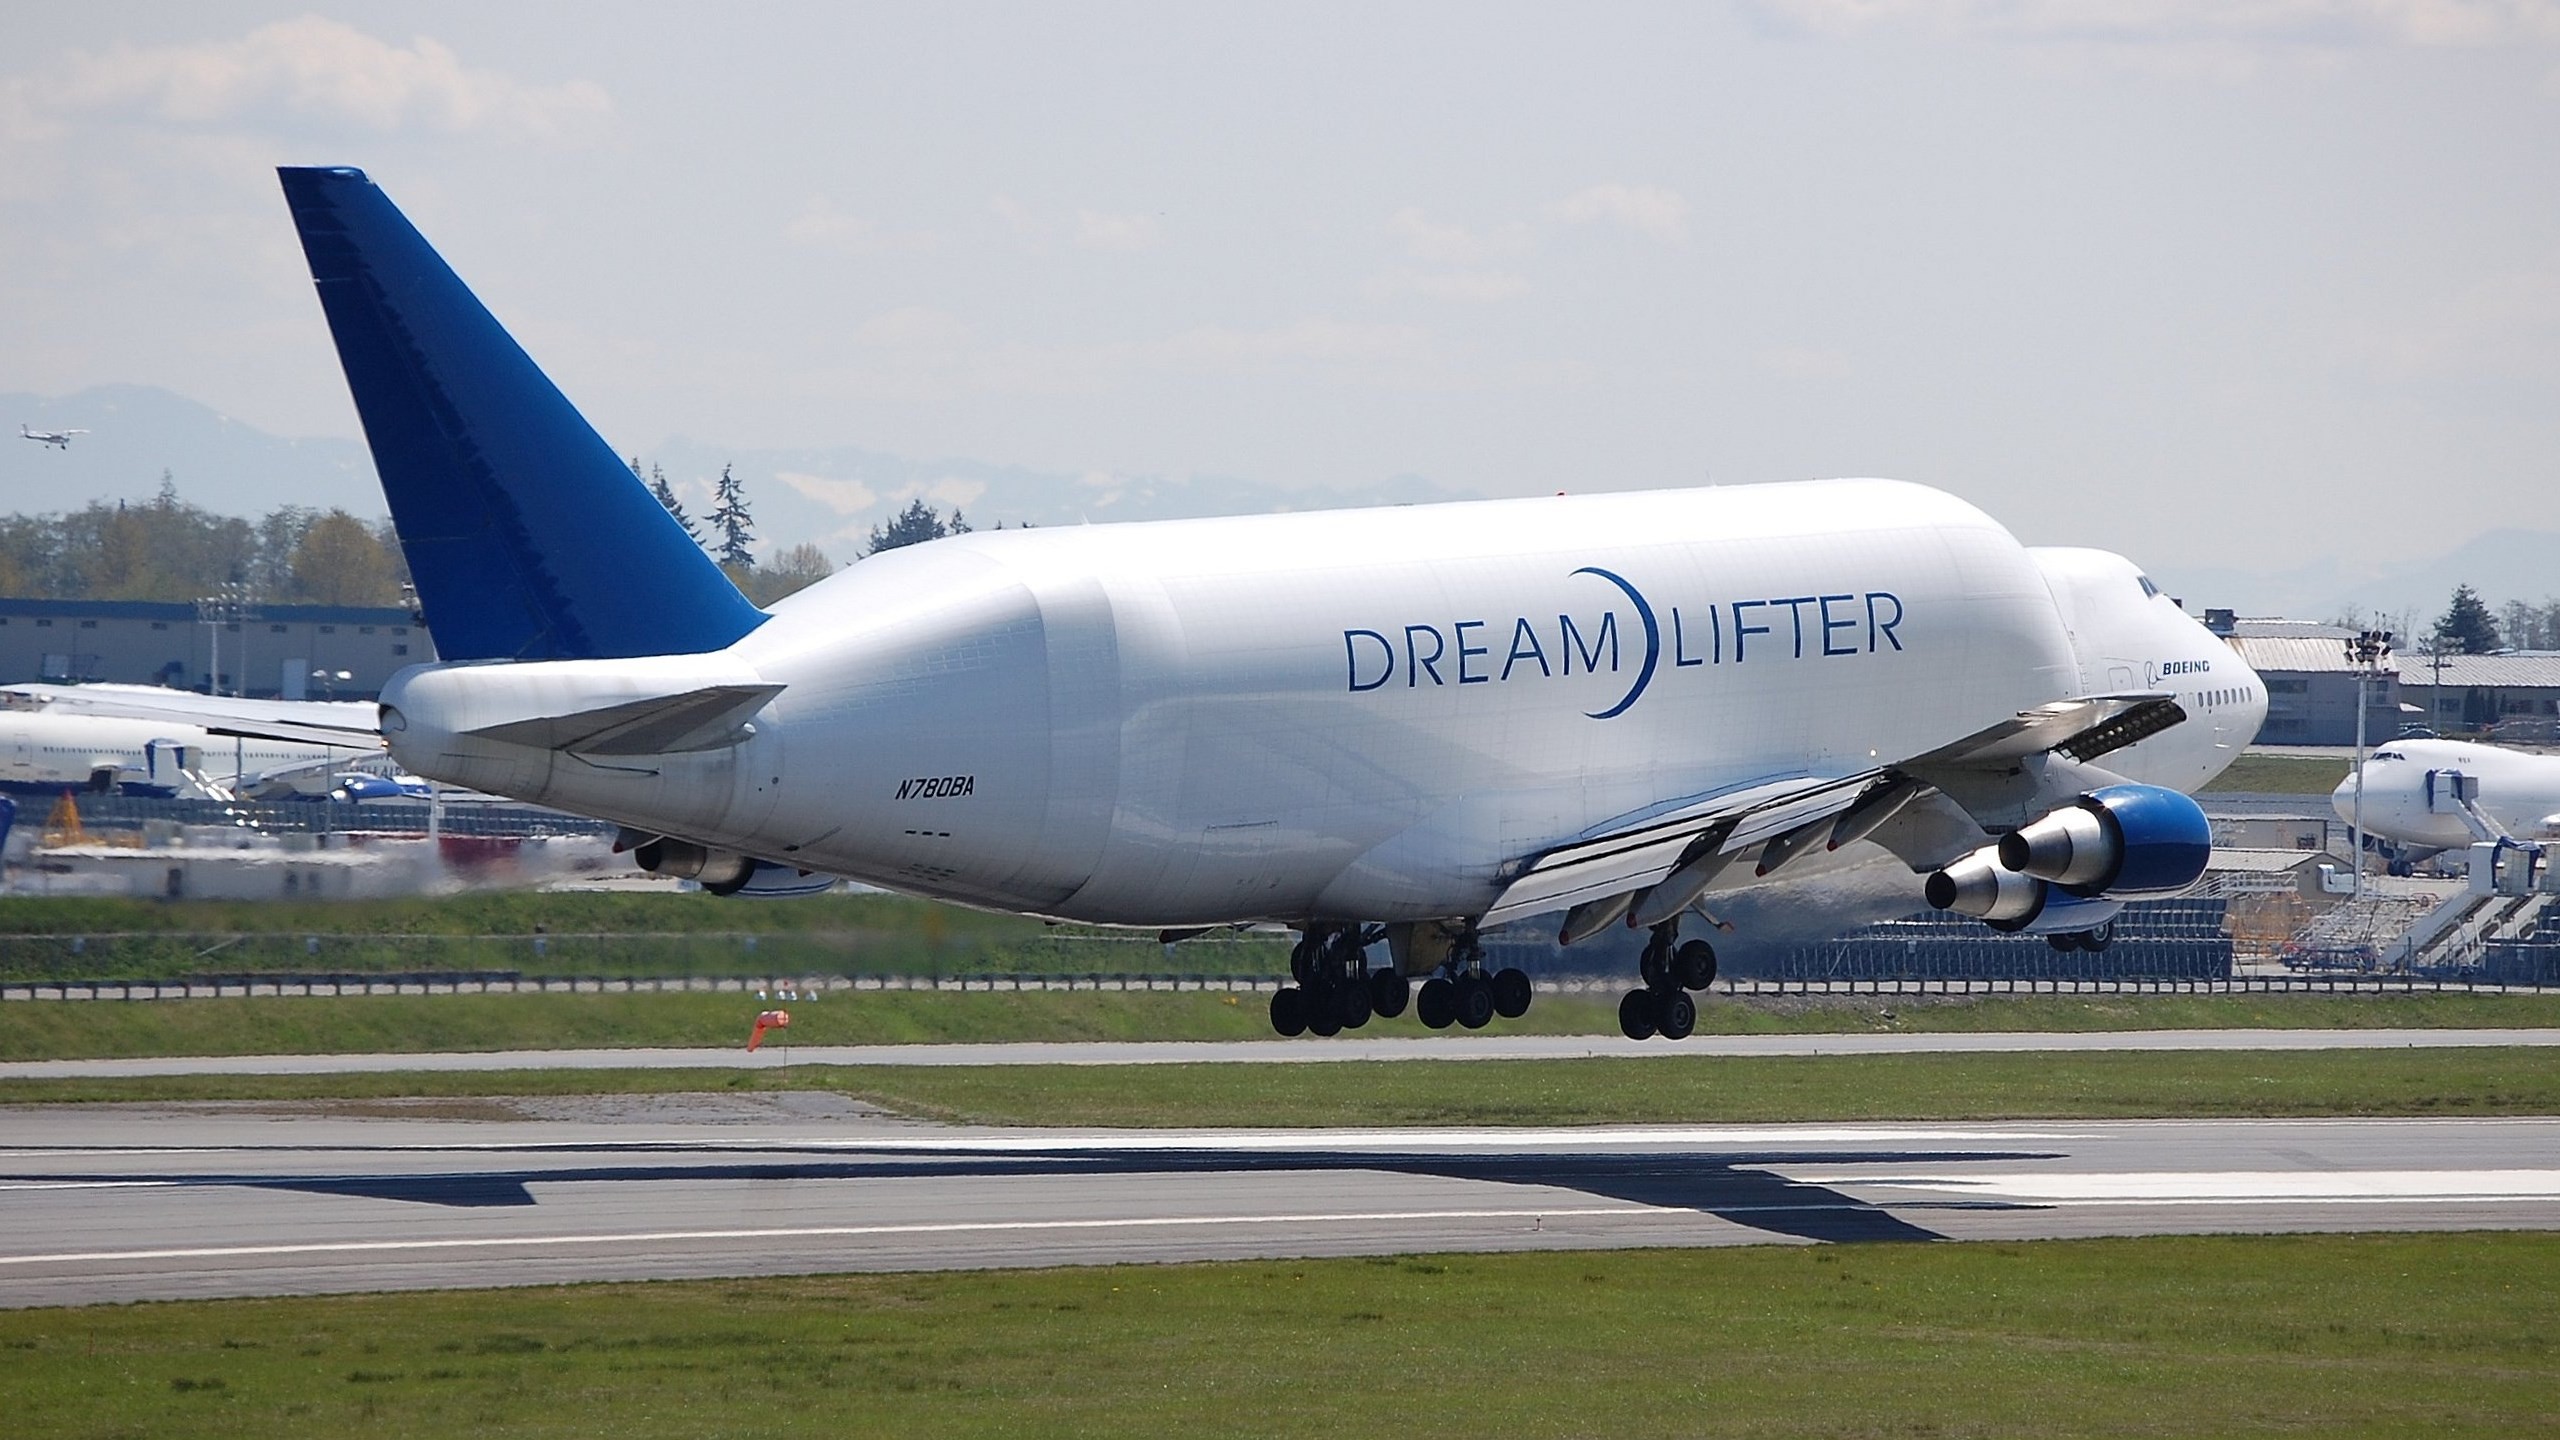 2560x1440 boeing 747 dreamlifter picture 1080p windows by Claxton Chester (2017-03-24)